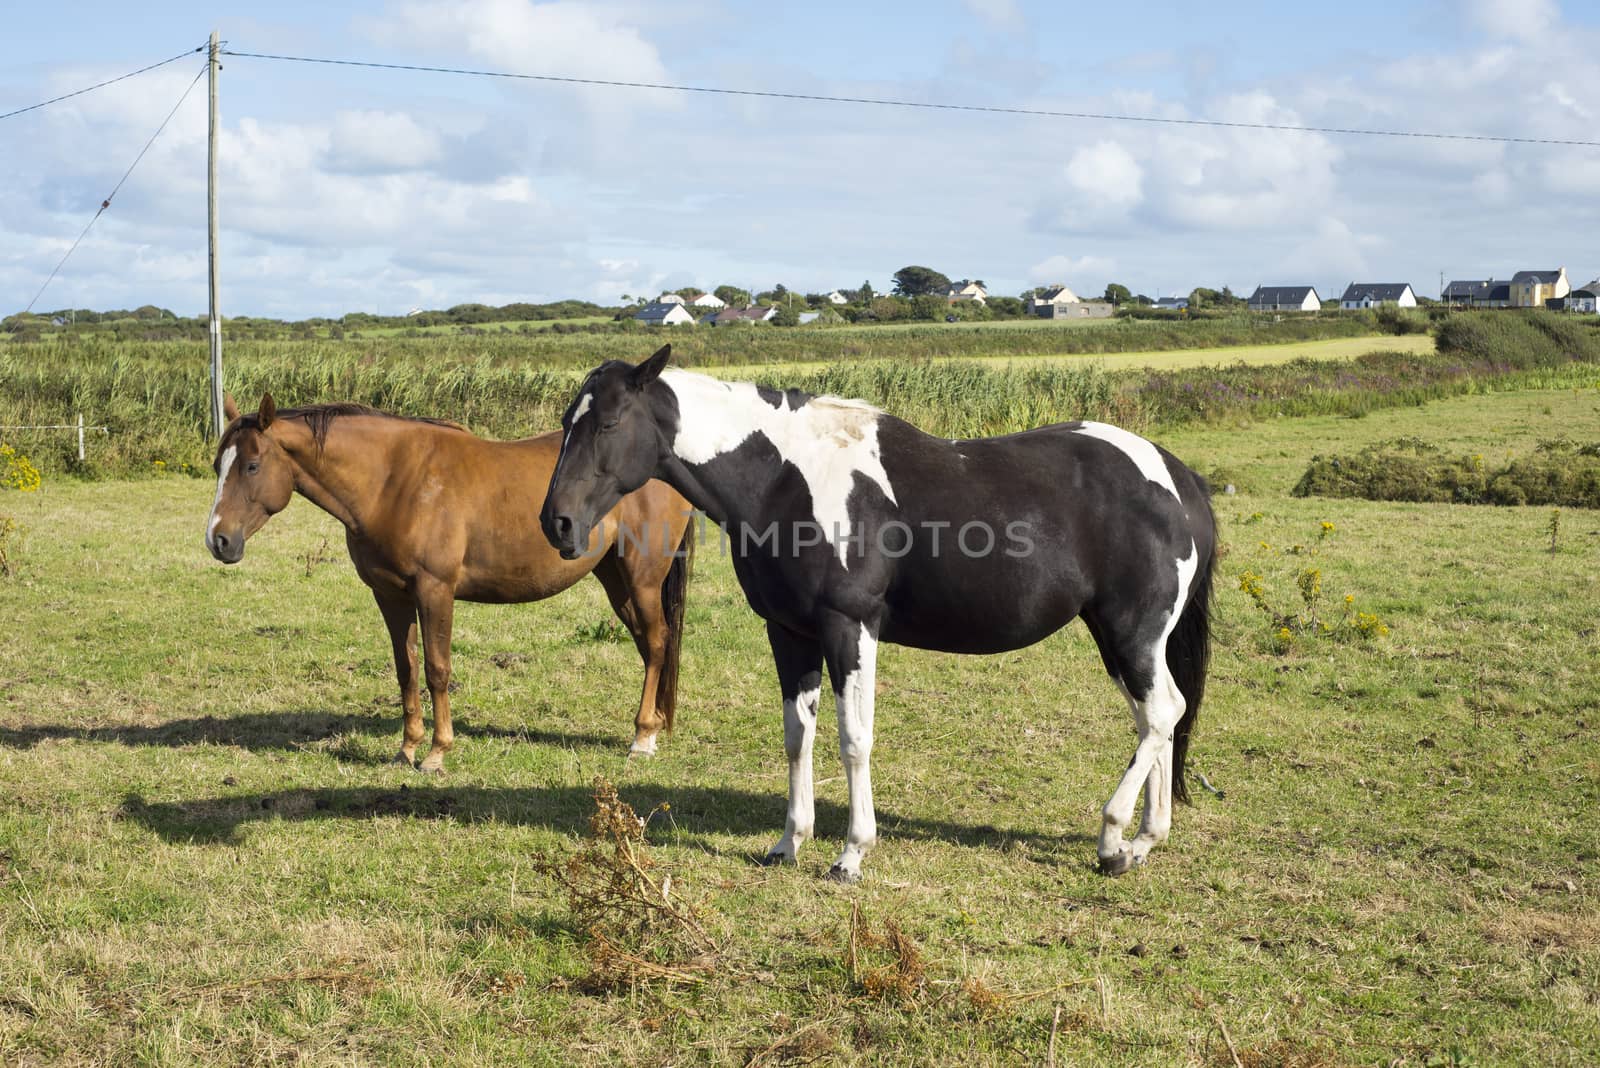 horses in a field near to the river shannon by morrbyte